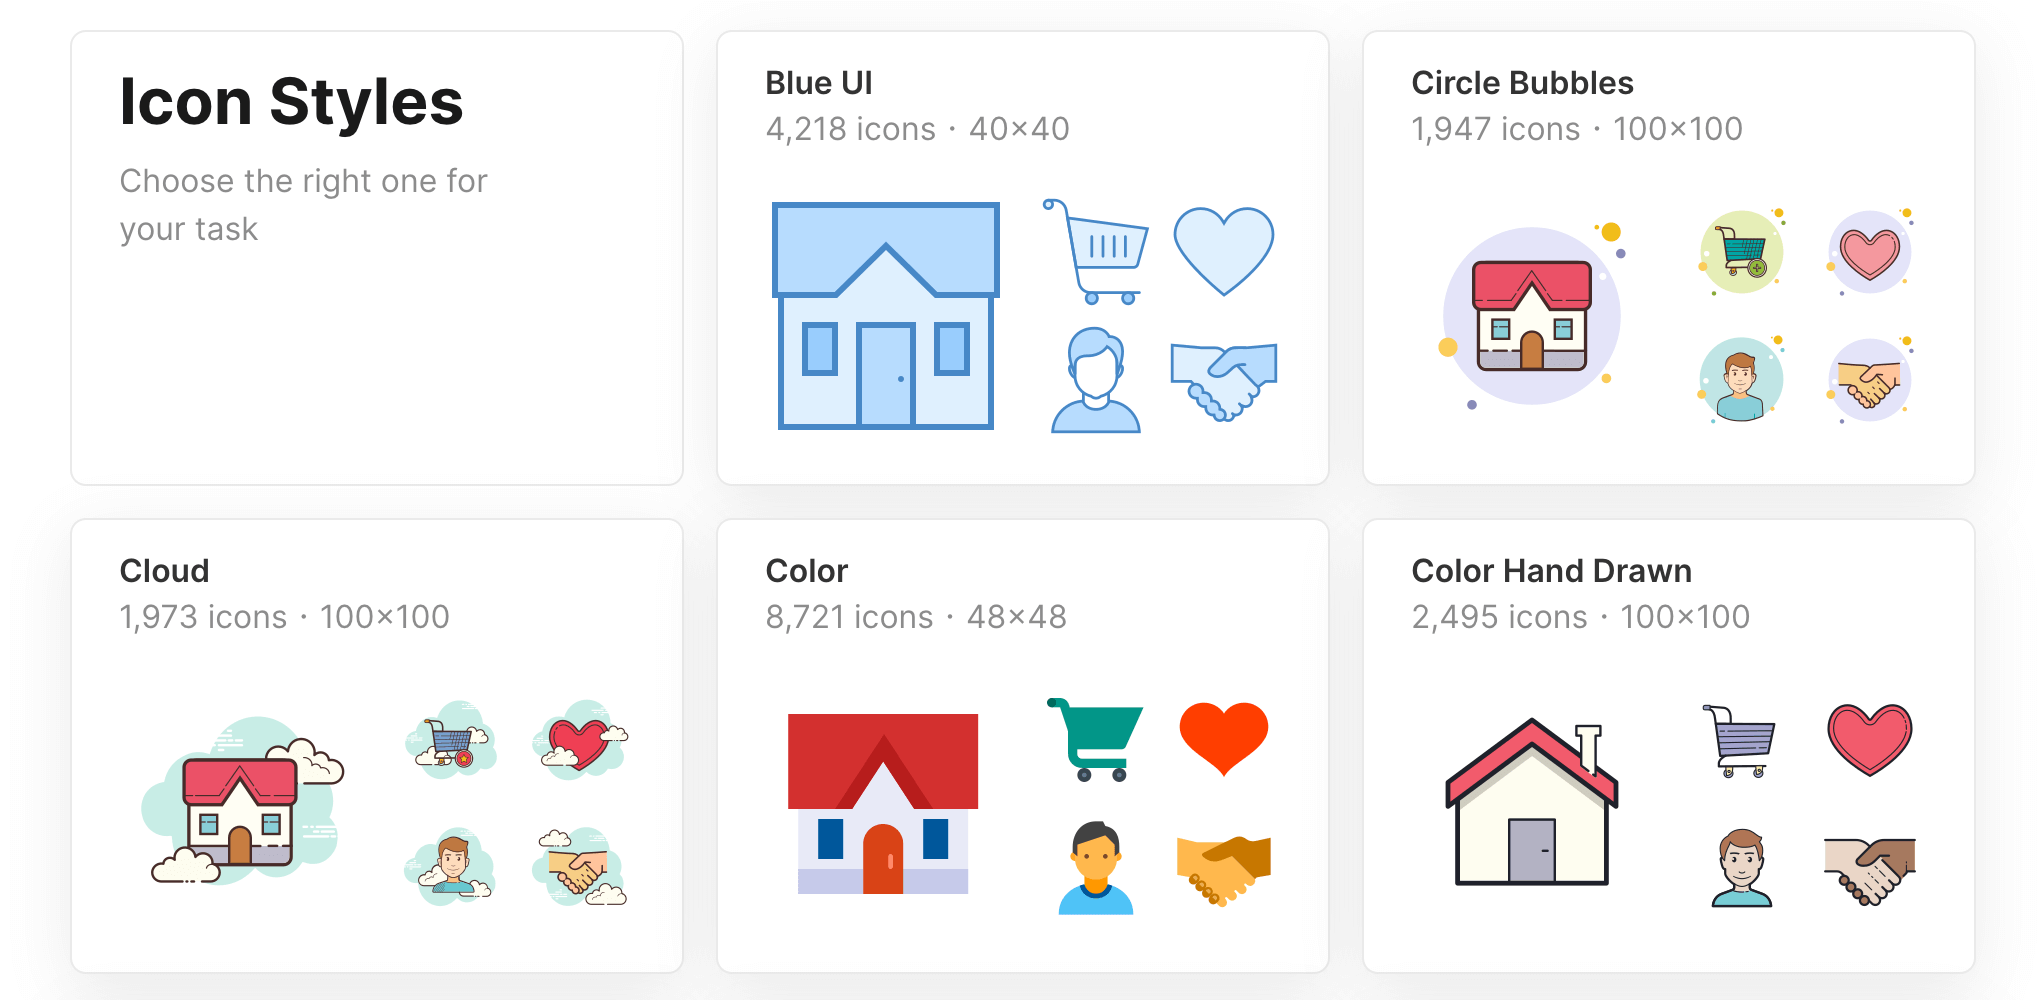 Double check - Free interface icons